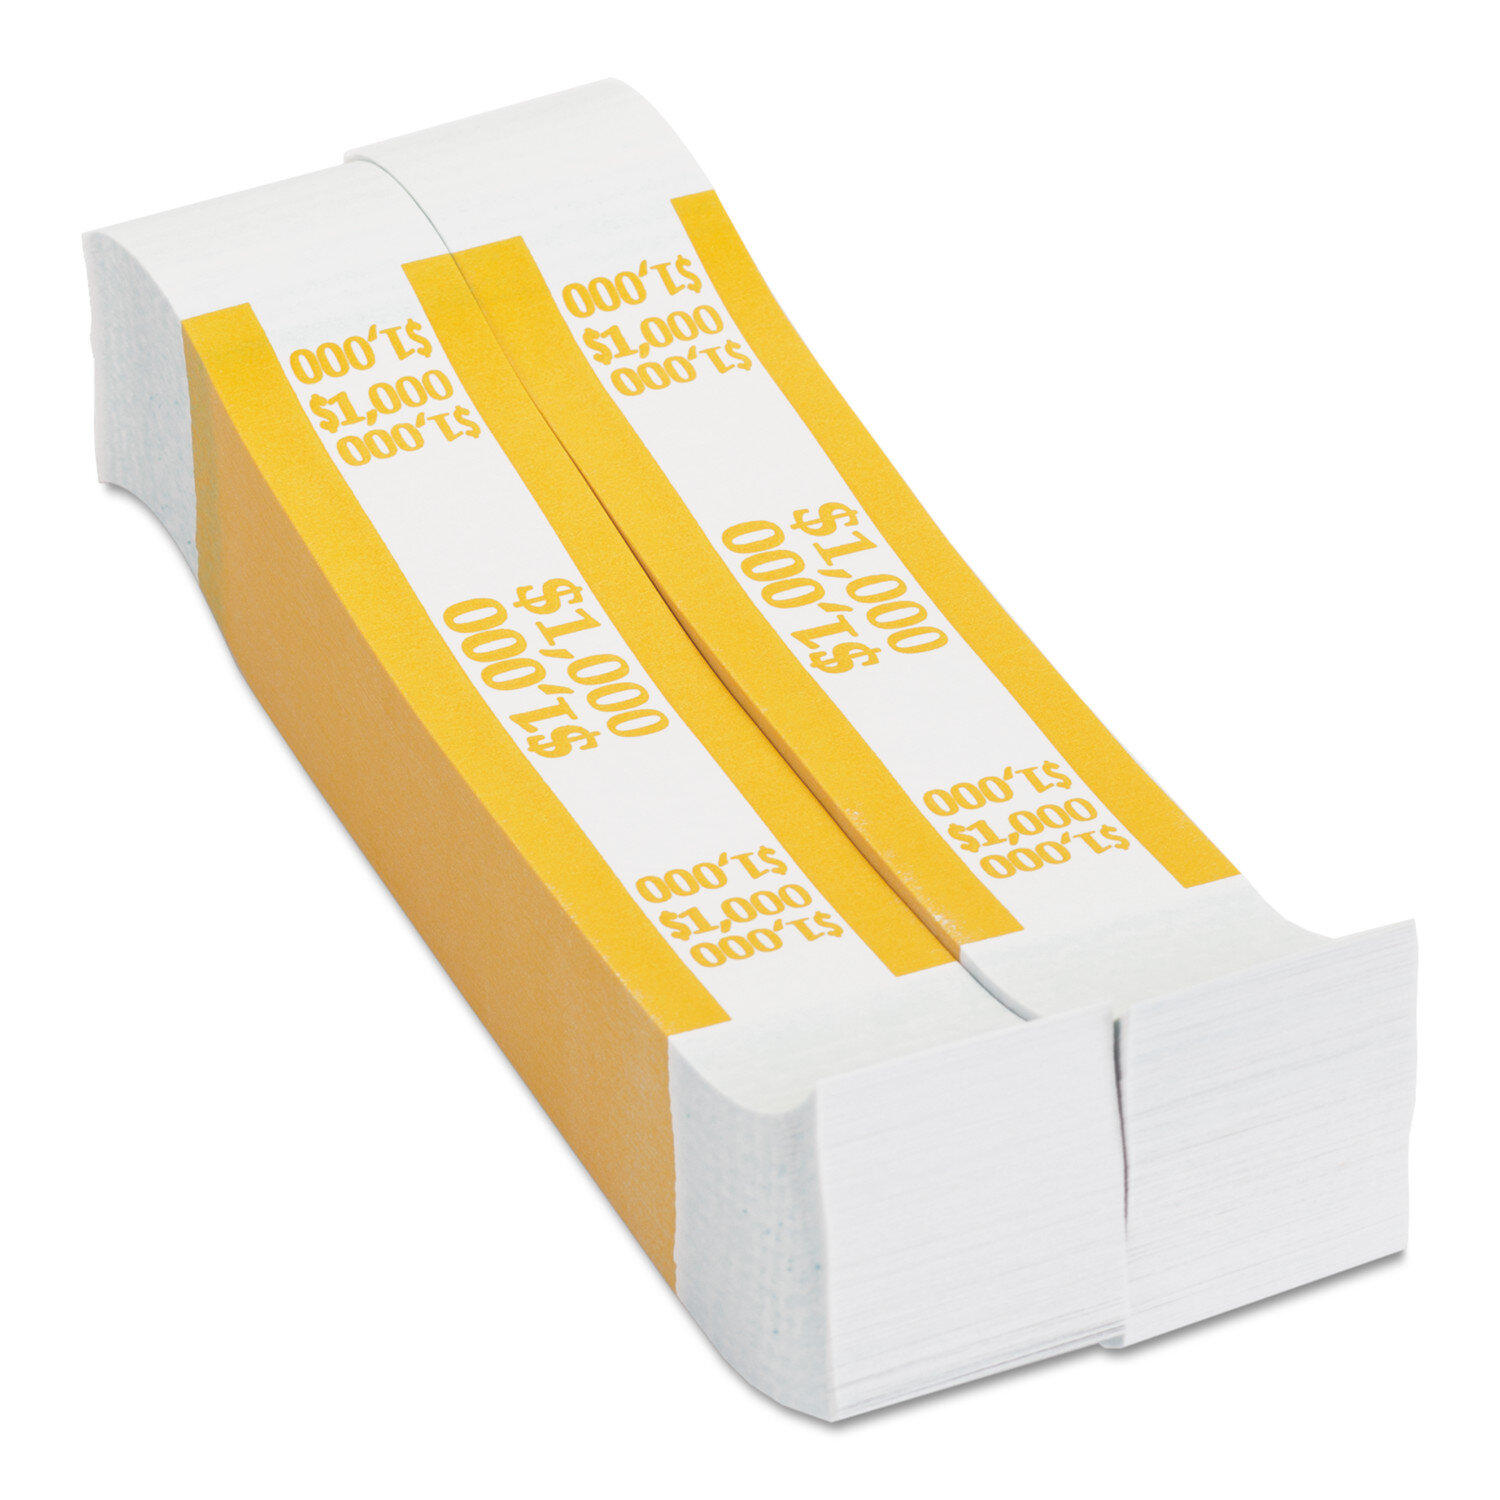 MMF INDUSTRIES Self-Adhesive Currency Straps, $1,000 In $10 Bills, 1000  Bands/Box | Wayfair